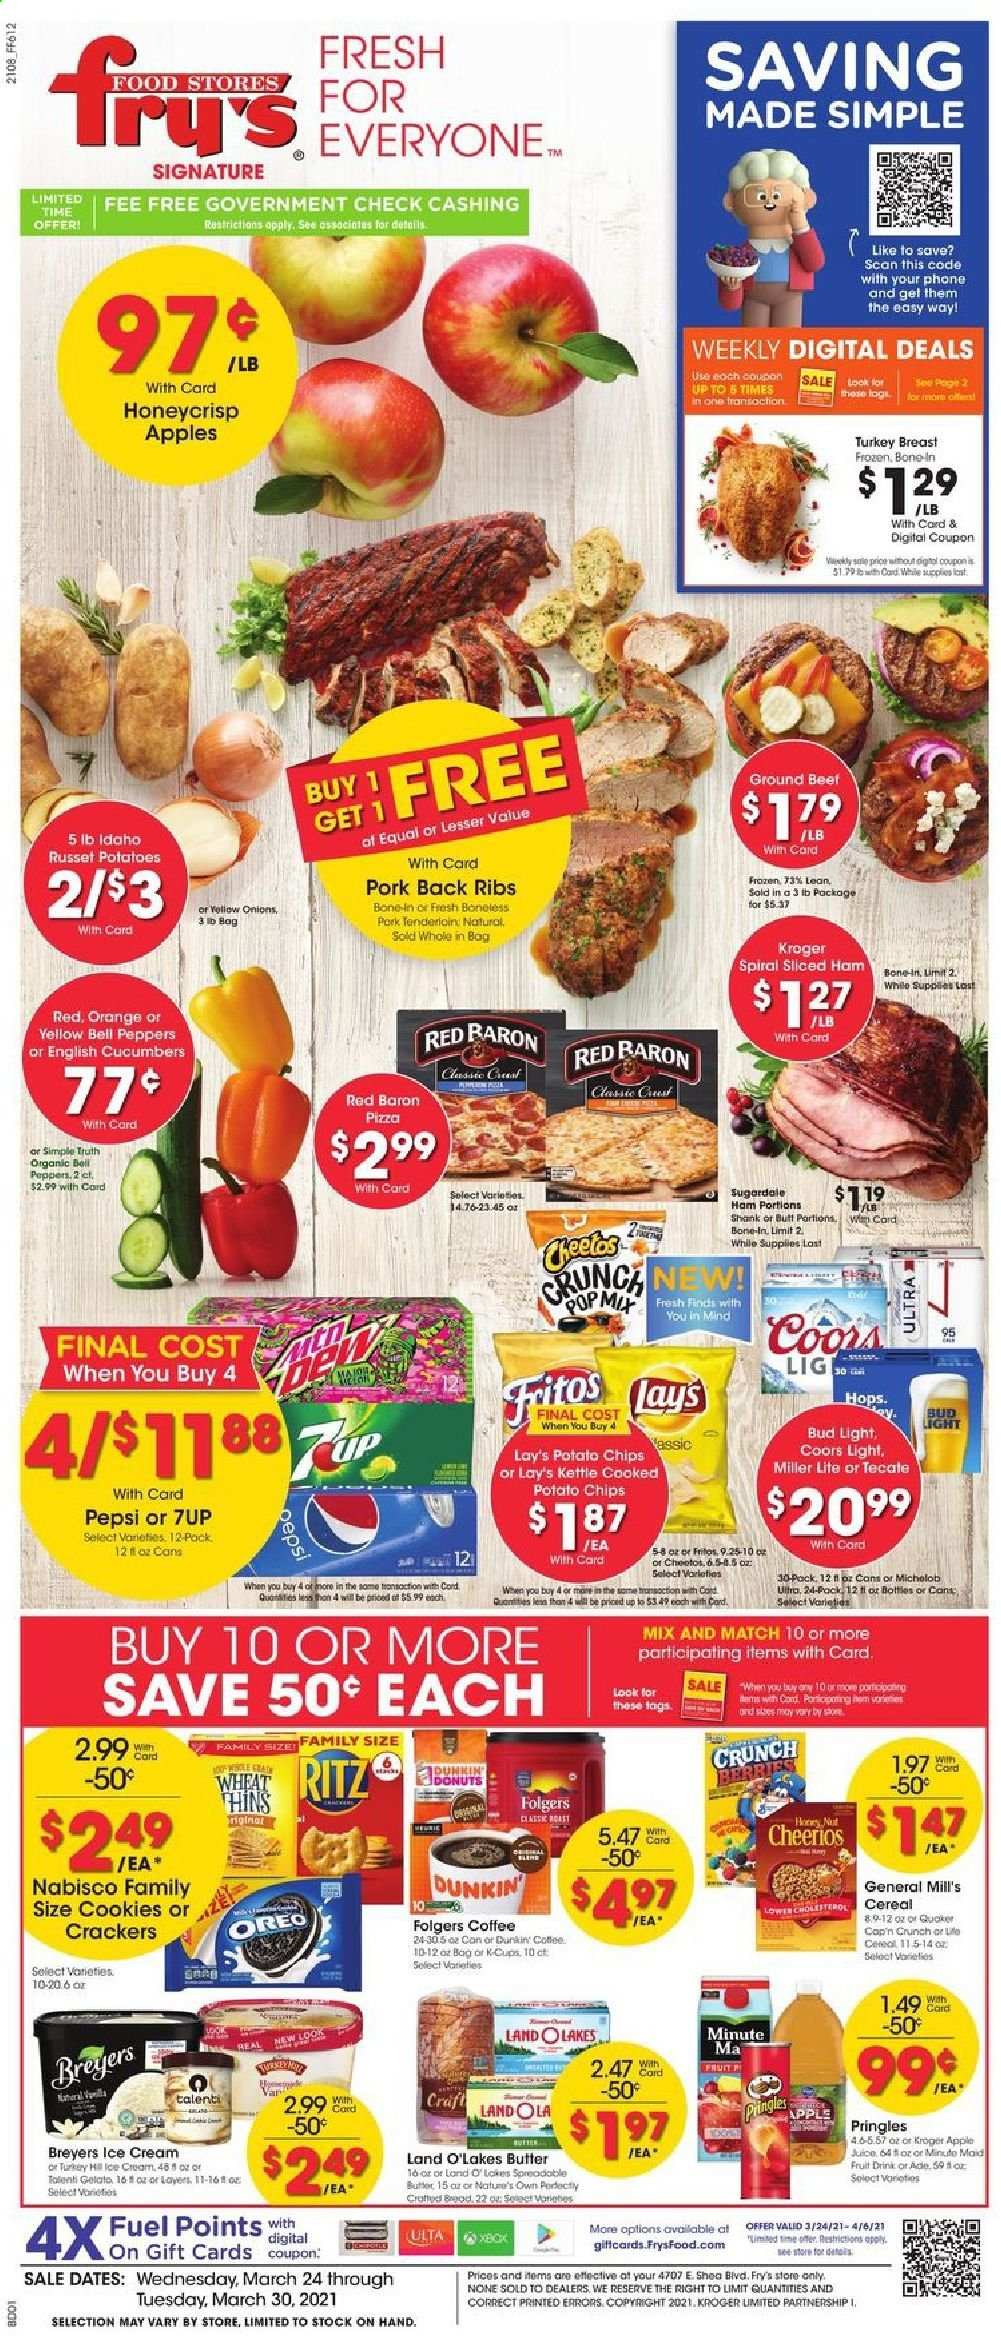 thumbnail - Fry’s Flyer - 03/24/2021 - 03/30/2021 - Sales products - donut, apples, oranges, pizza, ham, Oreo, butter, ice cream, Talenti Gelato, bell peppers, Red Baron, cookies, crackers, RITZ, potato chips, Pringles, Lay’s, cucumber, cereals, Fritos, Cheerios, Cap'n Crunch, Pepsi, fruit drink, 7UP, coffee, Folgers, beer, Miller Lite, Coors, Bud Light, turkey breast, beef meat, ground beef, pork meat, pork back ribs, Nature's Own. Page 1.